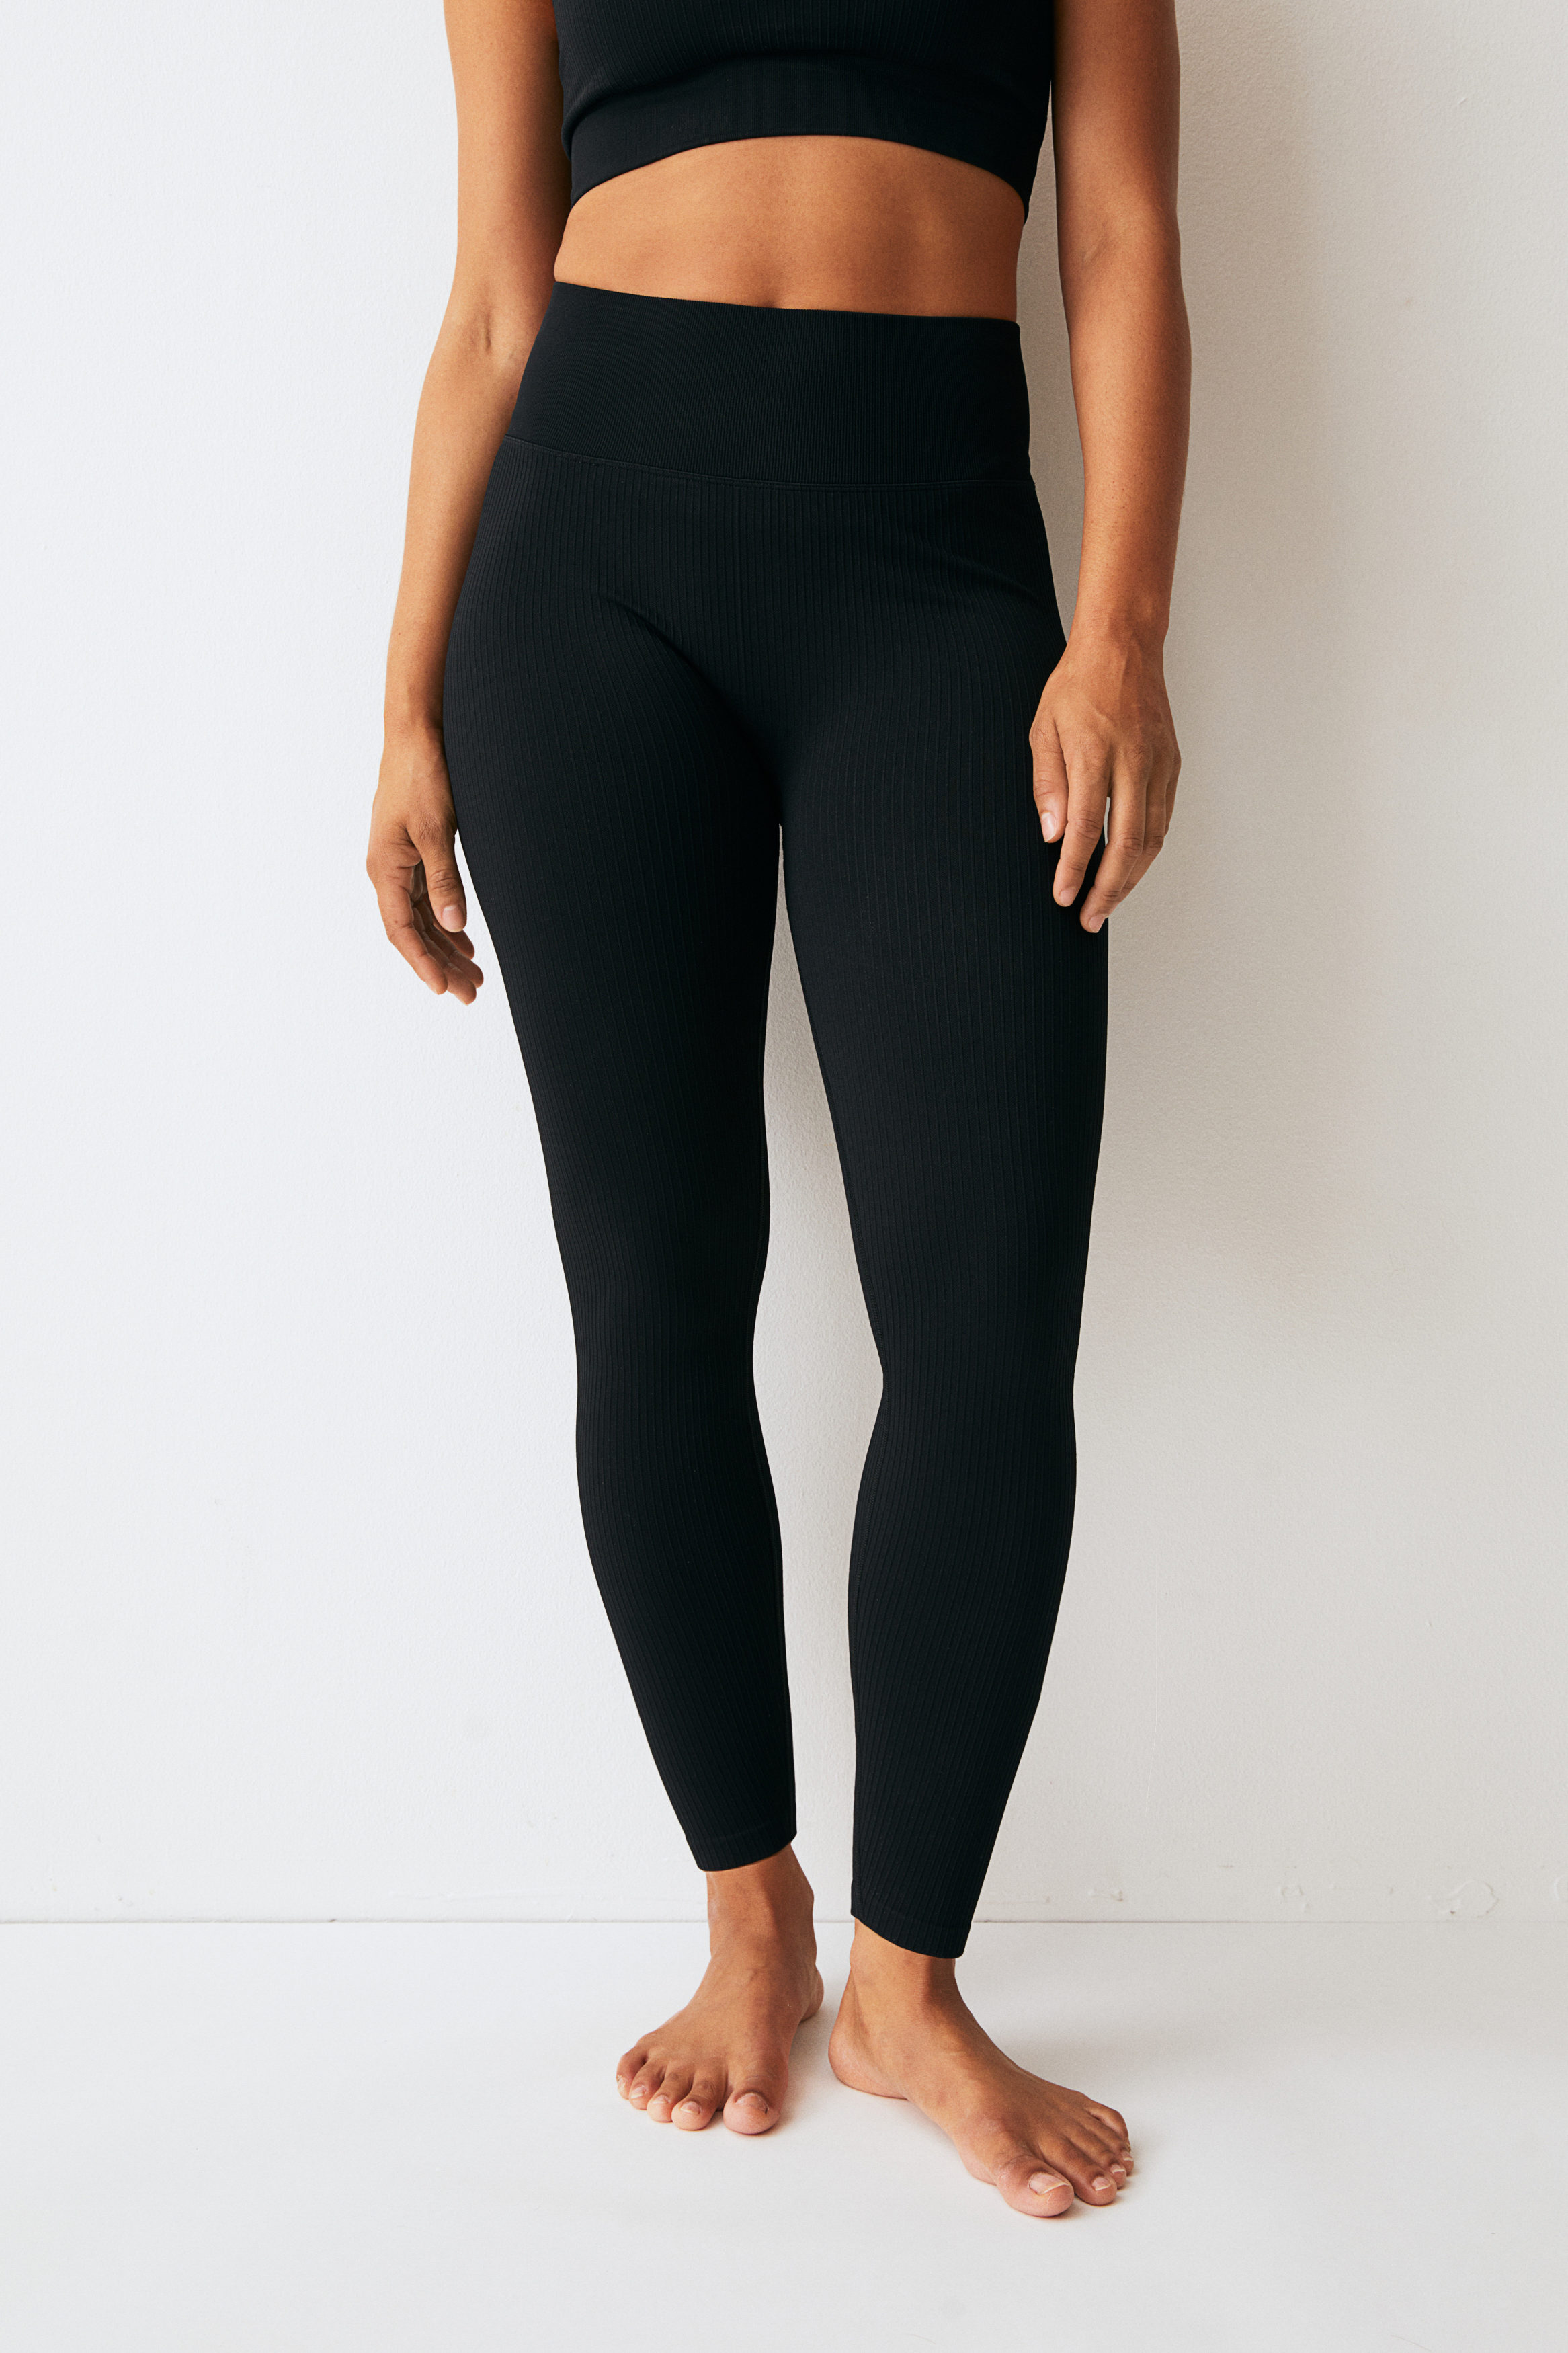 Buy DryMove™ Seamless Sports tights online in Egypt